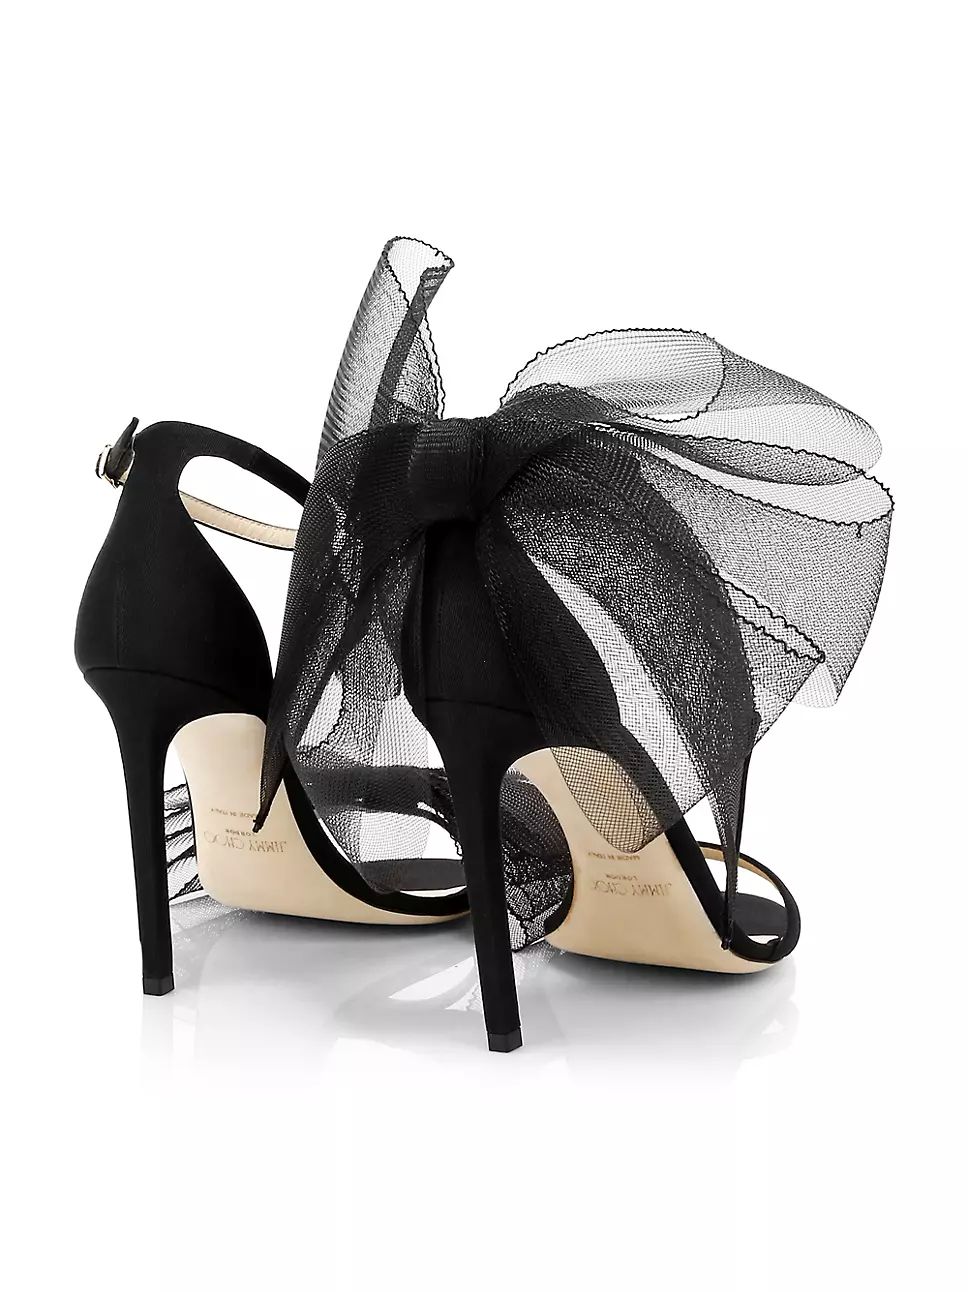 Aveline 100MM Tulle Bow Sandals | Saks Fifth Avenue